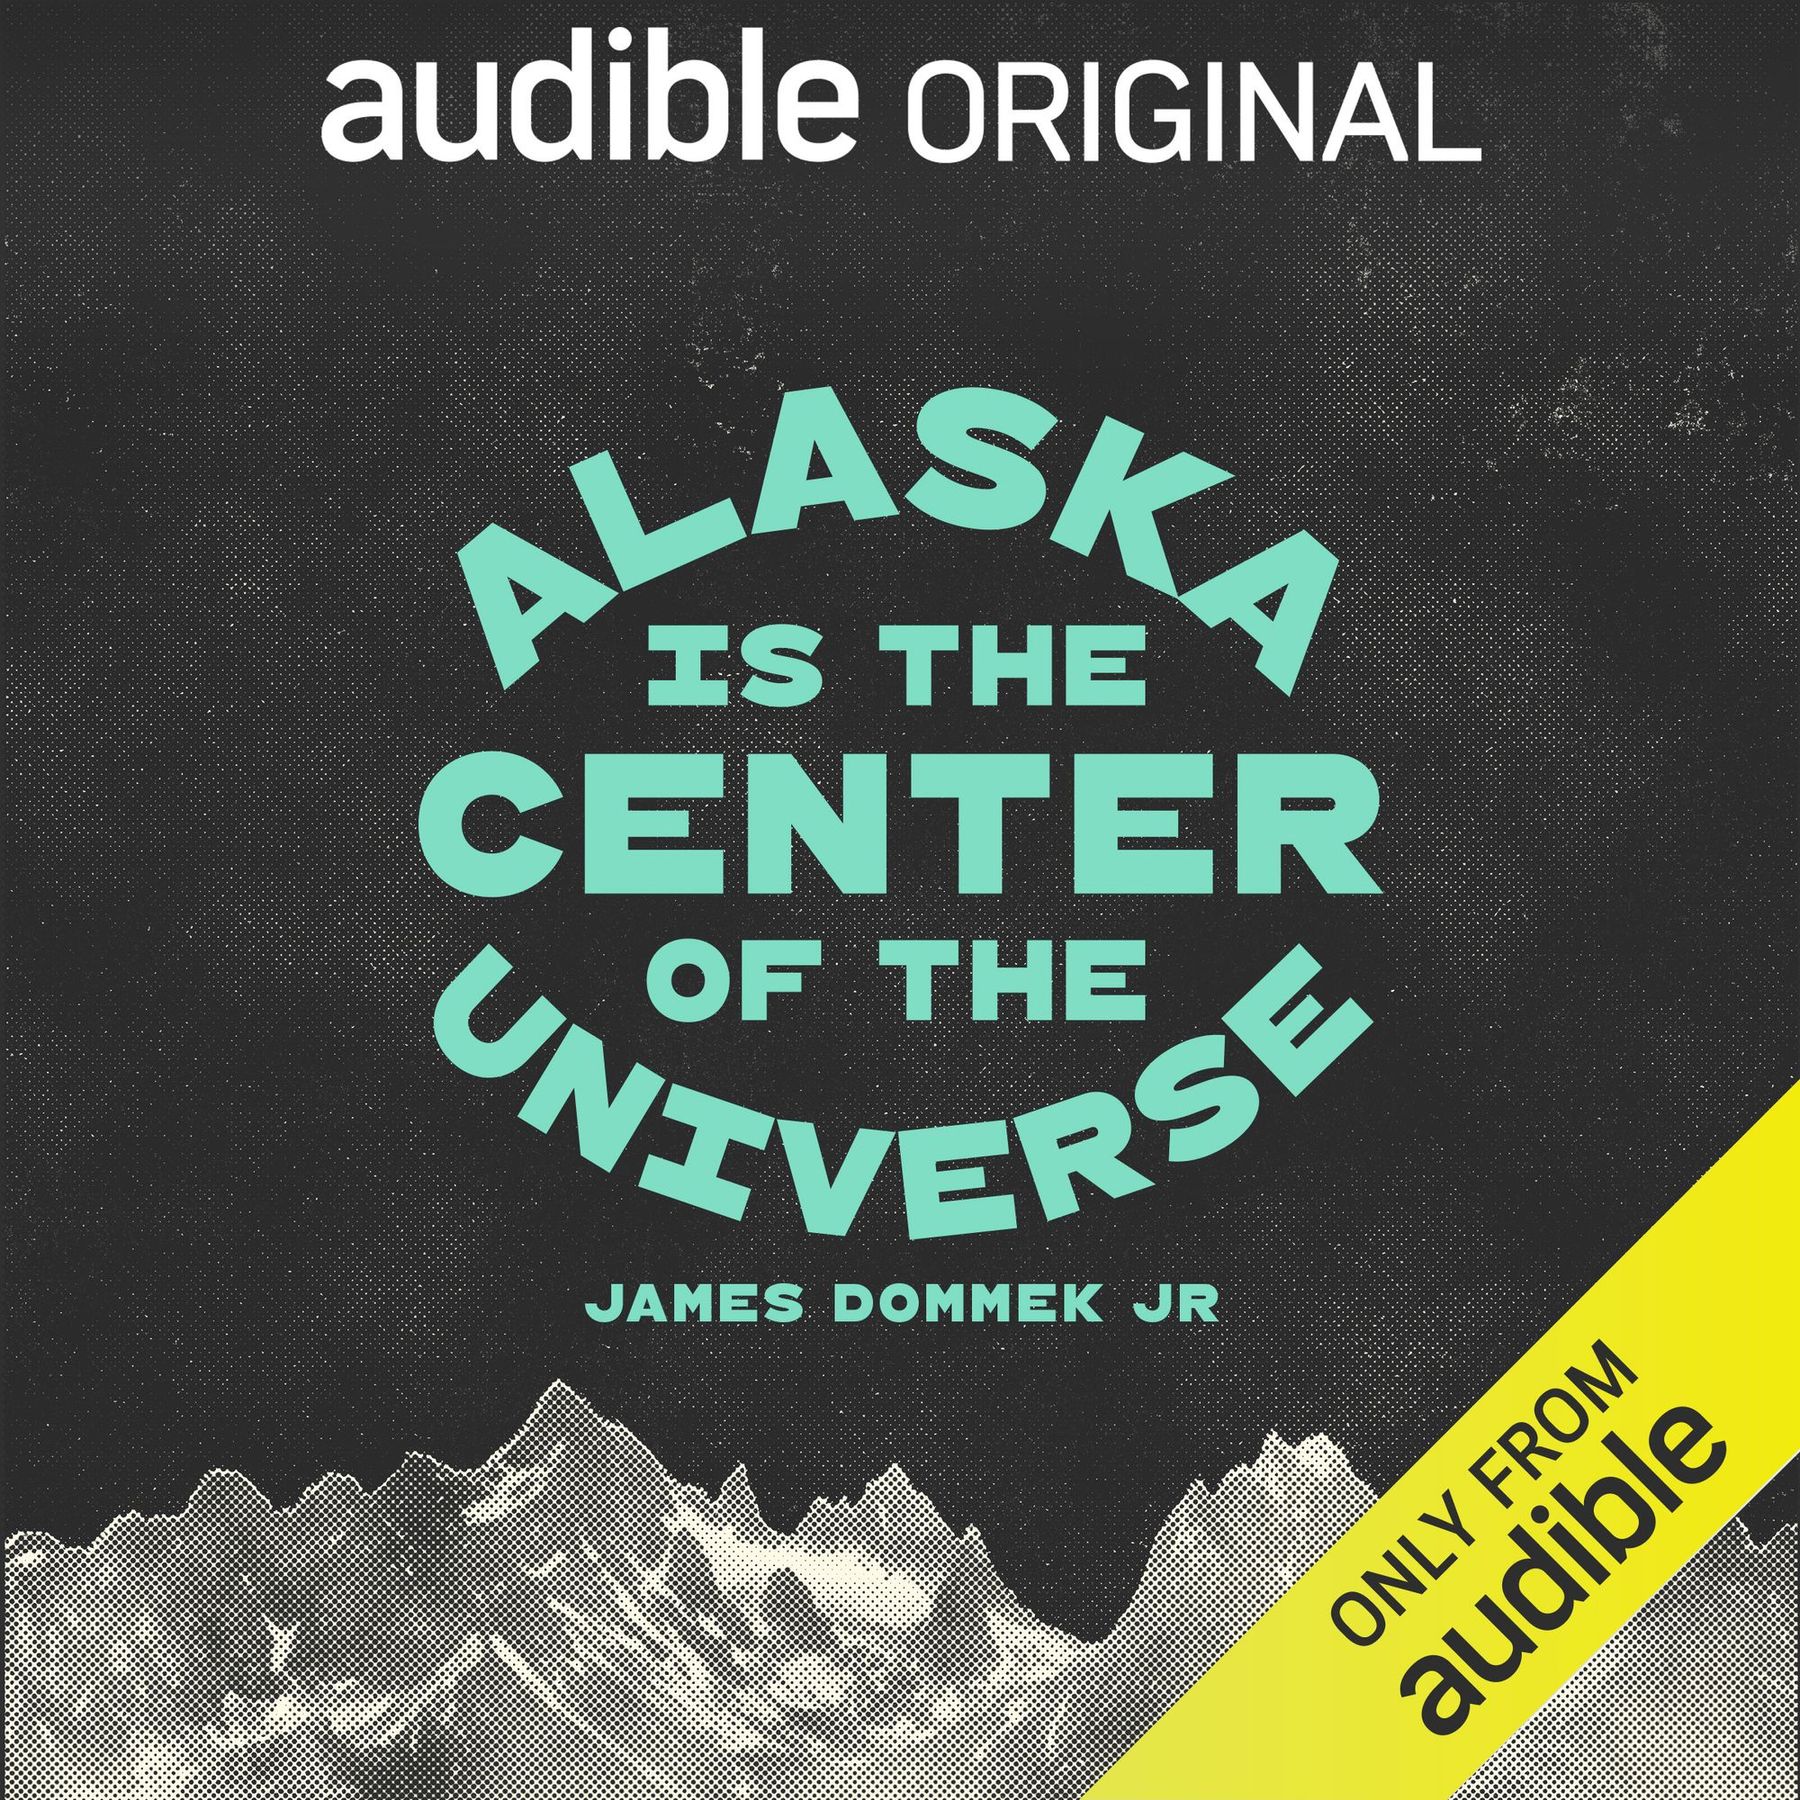 Alaska is the Center of the Universe